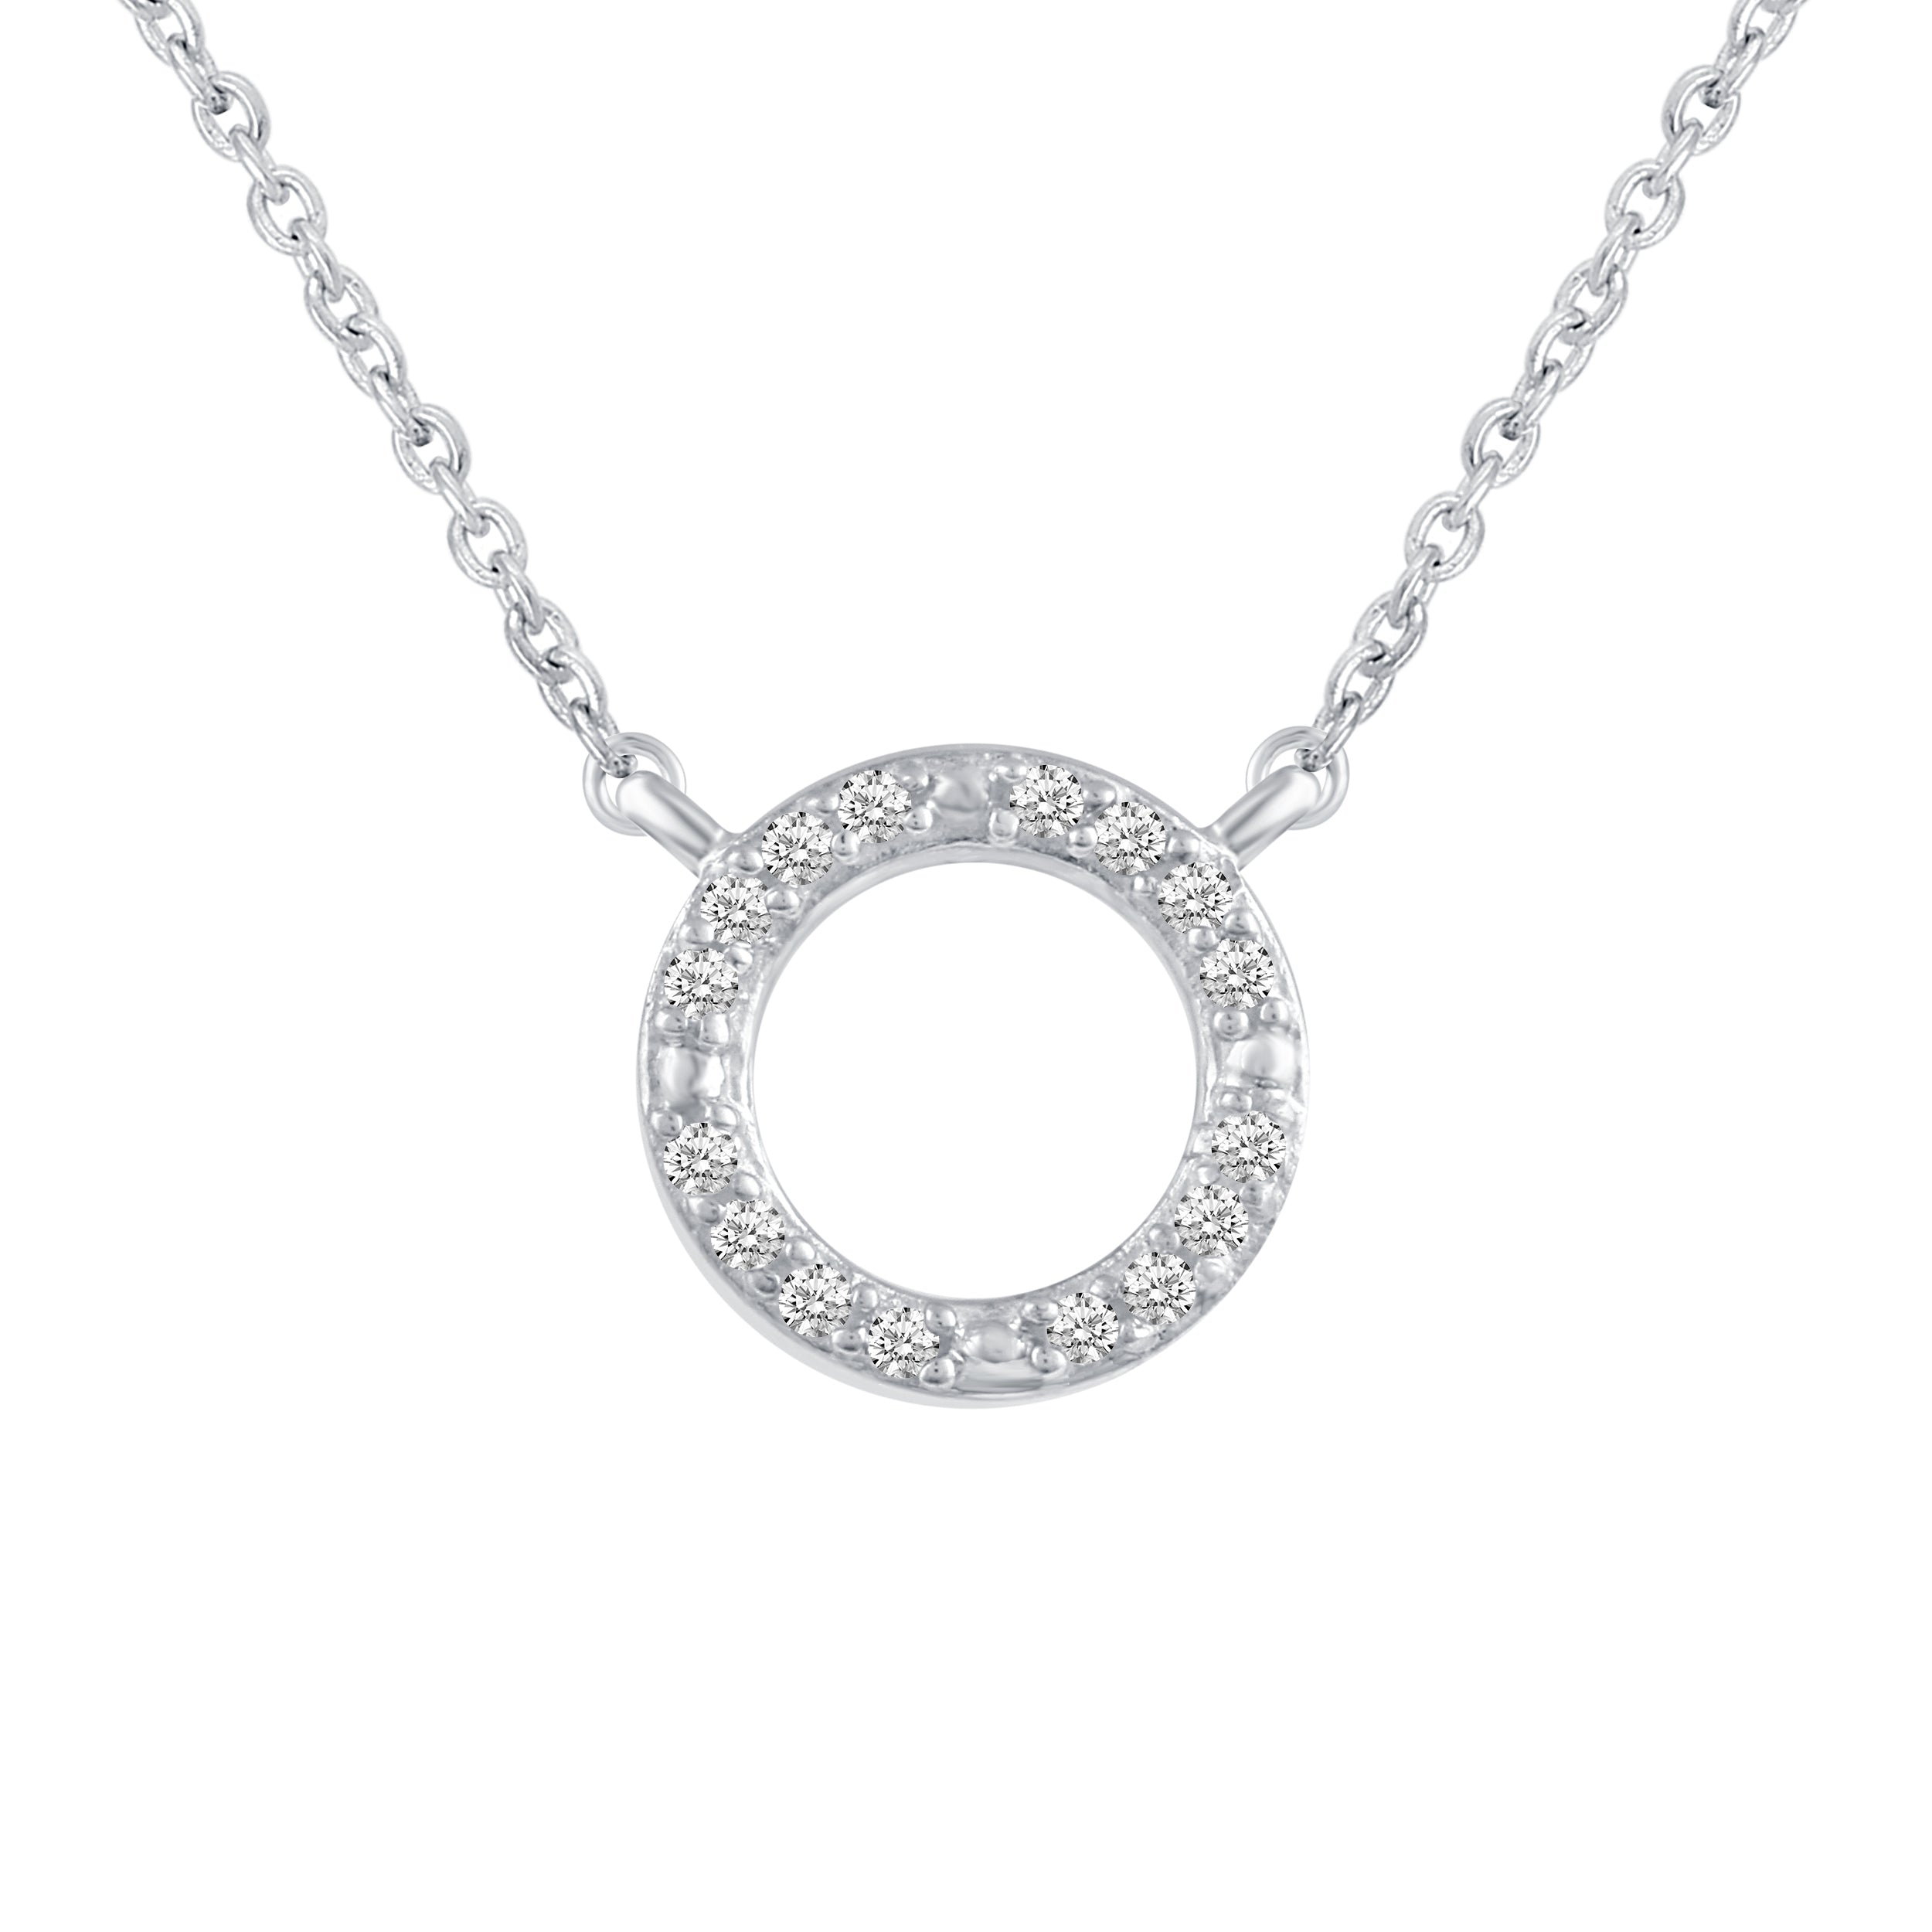 Circle 'n Circle Diamond Necklace – Forever Today by Jilco